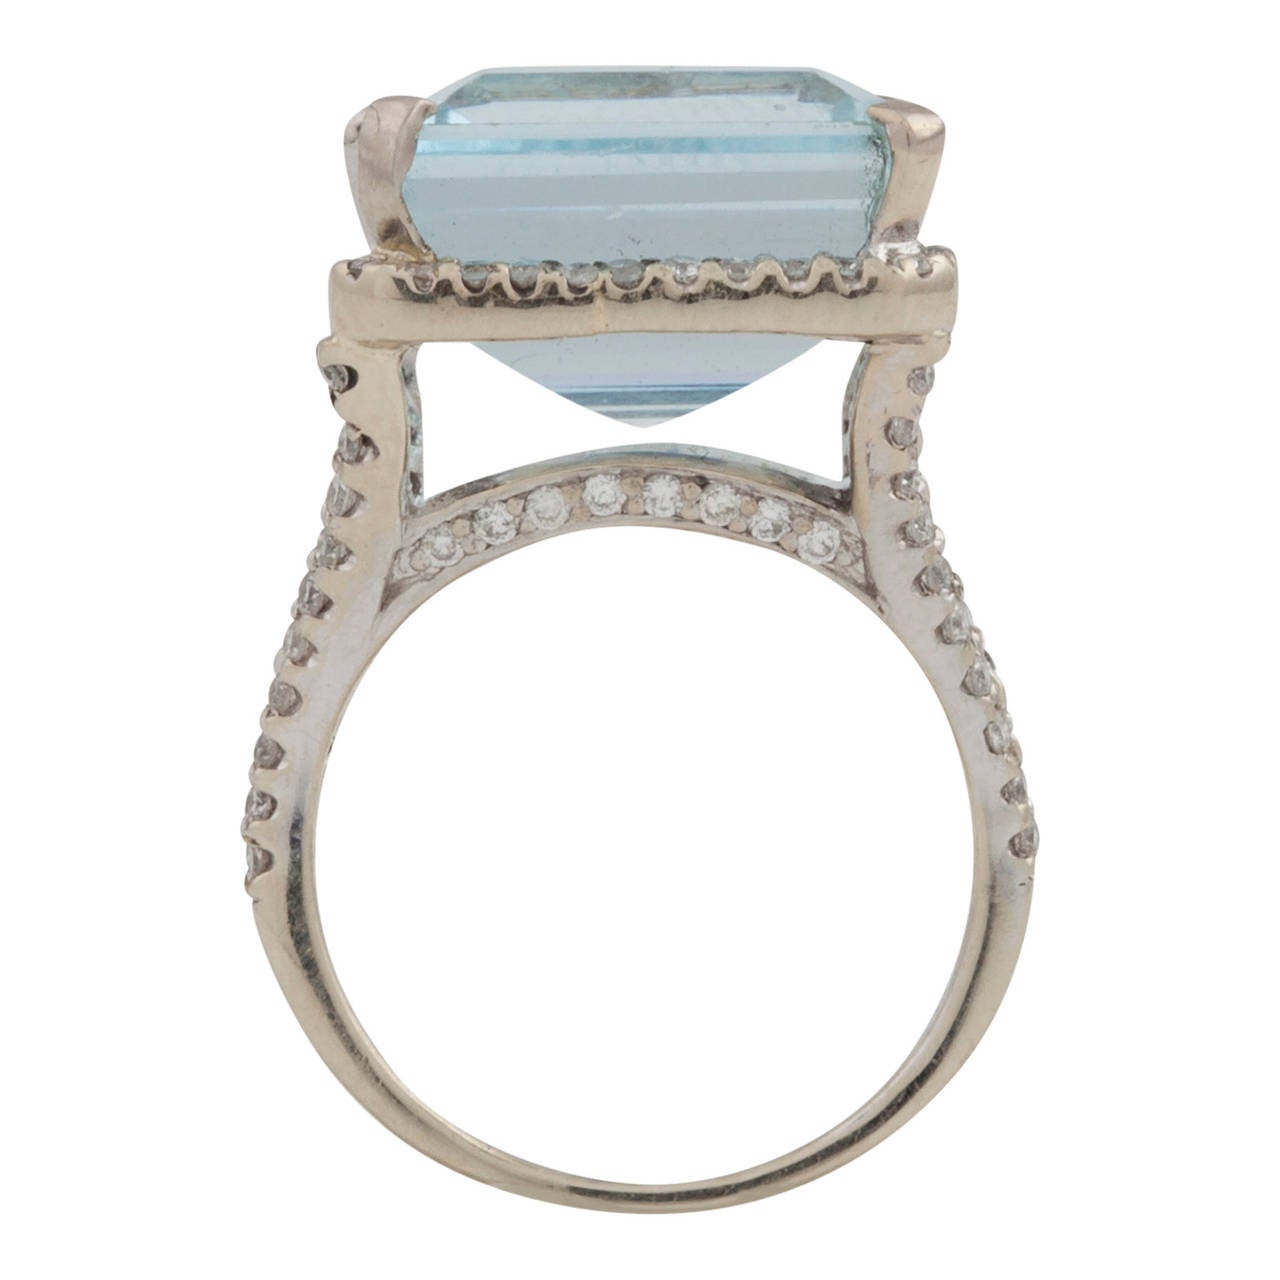 11 Carat Square Cut Aquamarine and Diamond Ring Set in White Gold In Excellent Condition For Sale In Malvern, Victoria